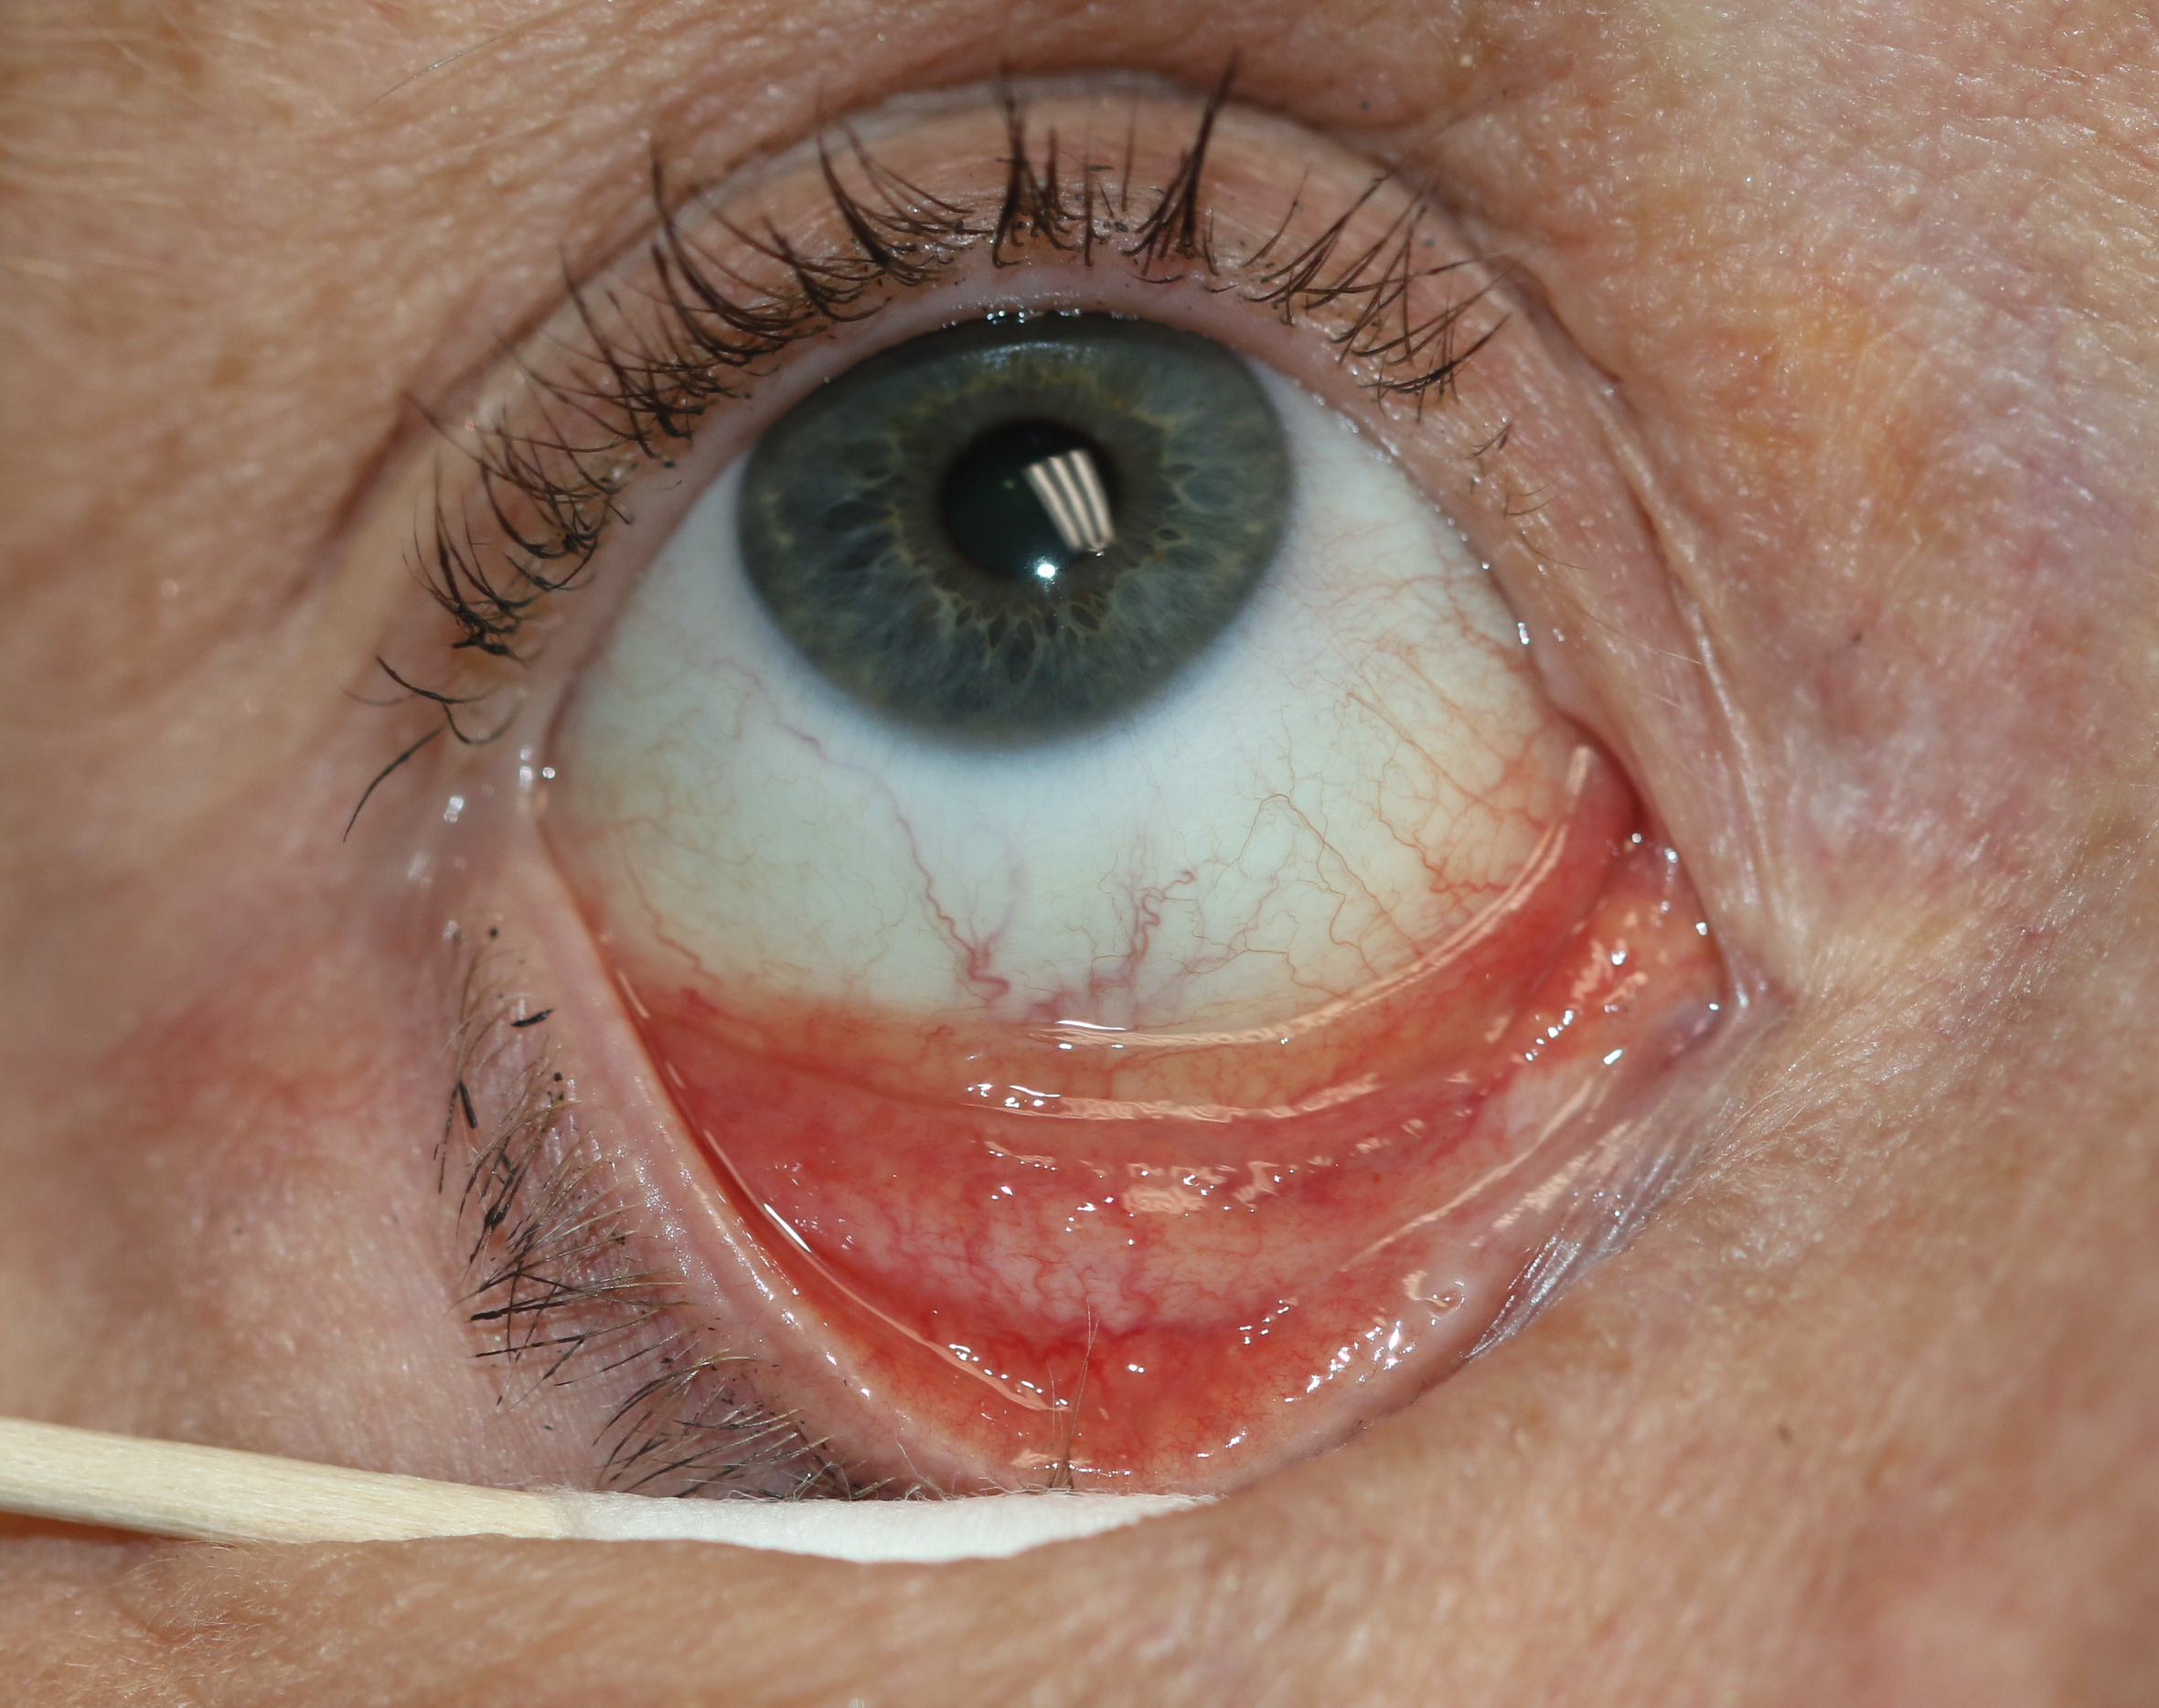 Follicular conjunctivitis may be seen with viral infections like herpes zoster, Epstein-Barr virus infection, infectious mononucleosis), chlamydial infections, and in reaction of topical medications and molluscum contagiosum